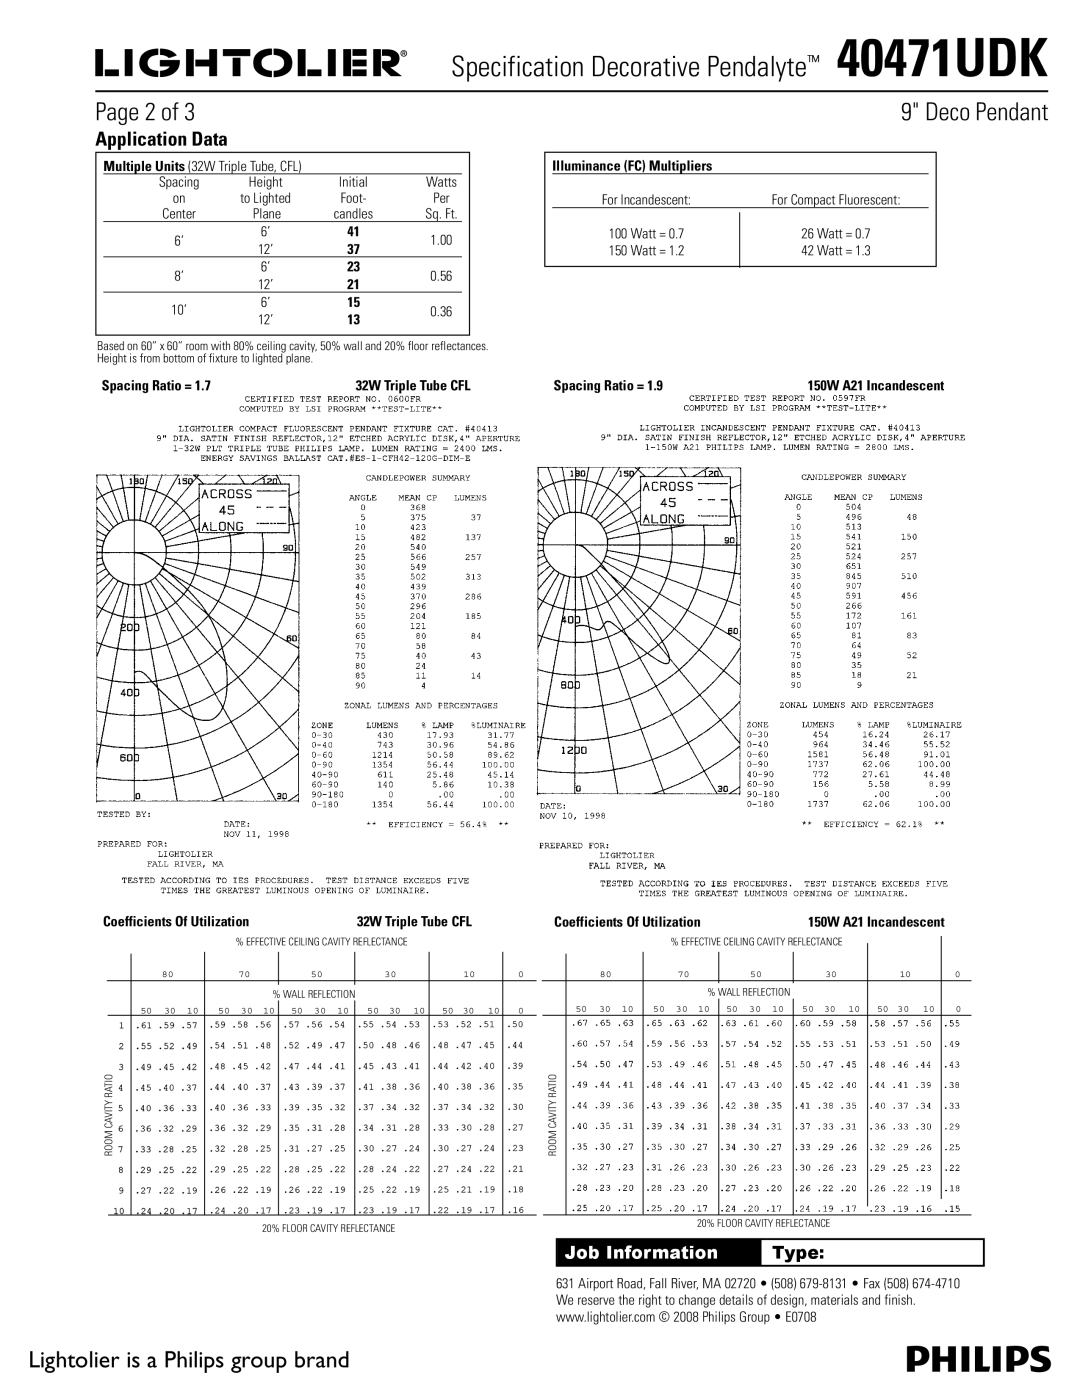 Lightolier 40471UDK Page 2 of, Application Data, Type, Deco Pendant, Lightolier is a Philips group brand, Job Information 